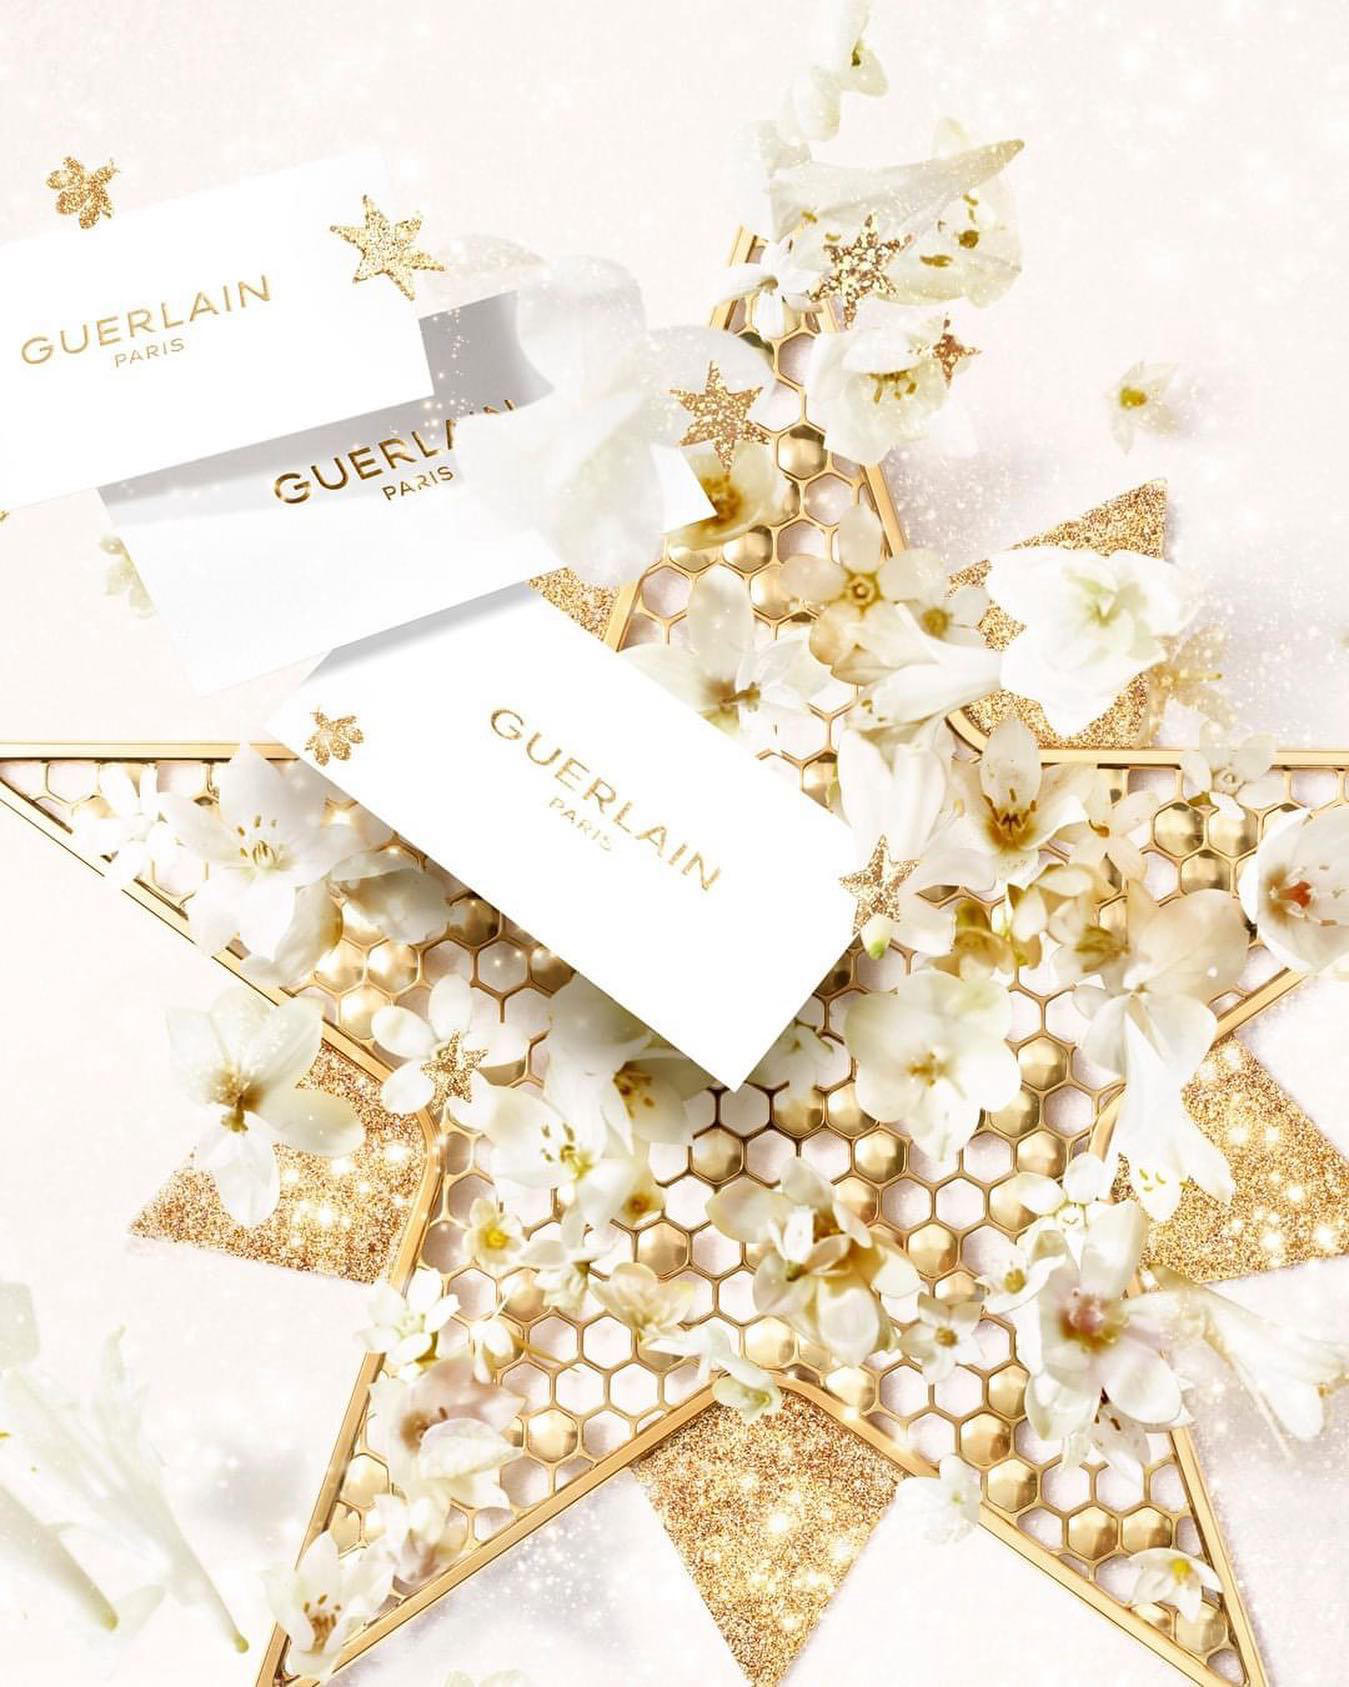 Guerlain - A last-minute Christmas card to slip under the tree, with love from Guerlain